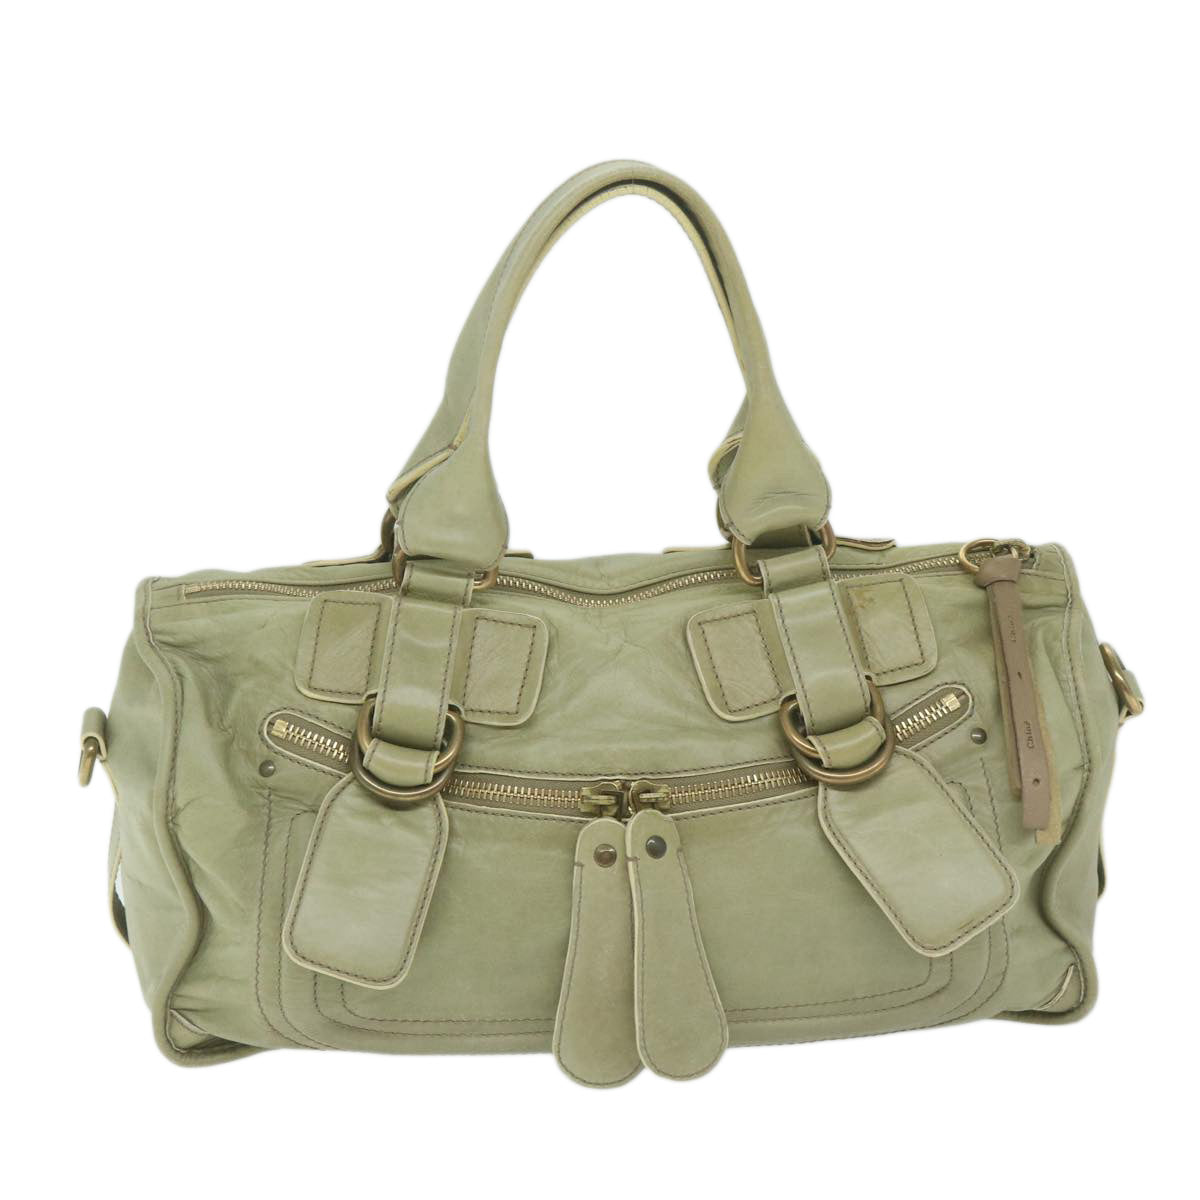 Chloe Hand Bag Leather Green Auth bs11020 - 0